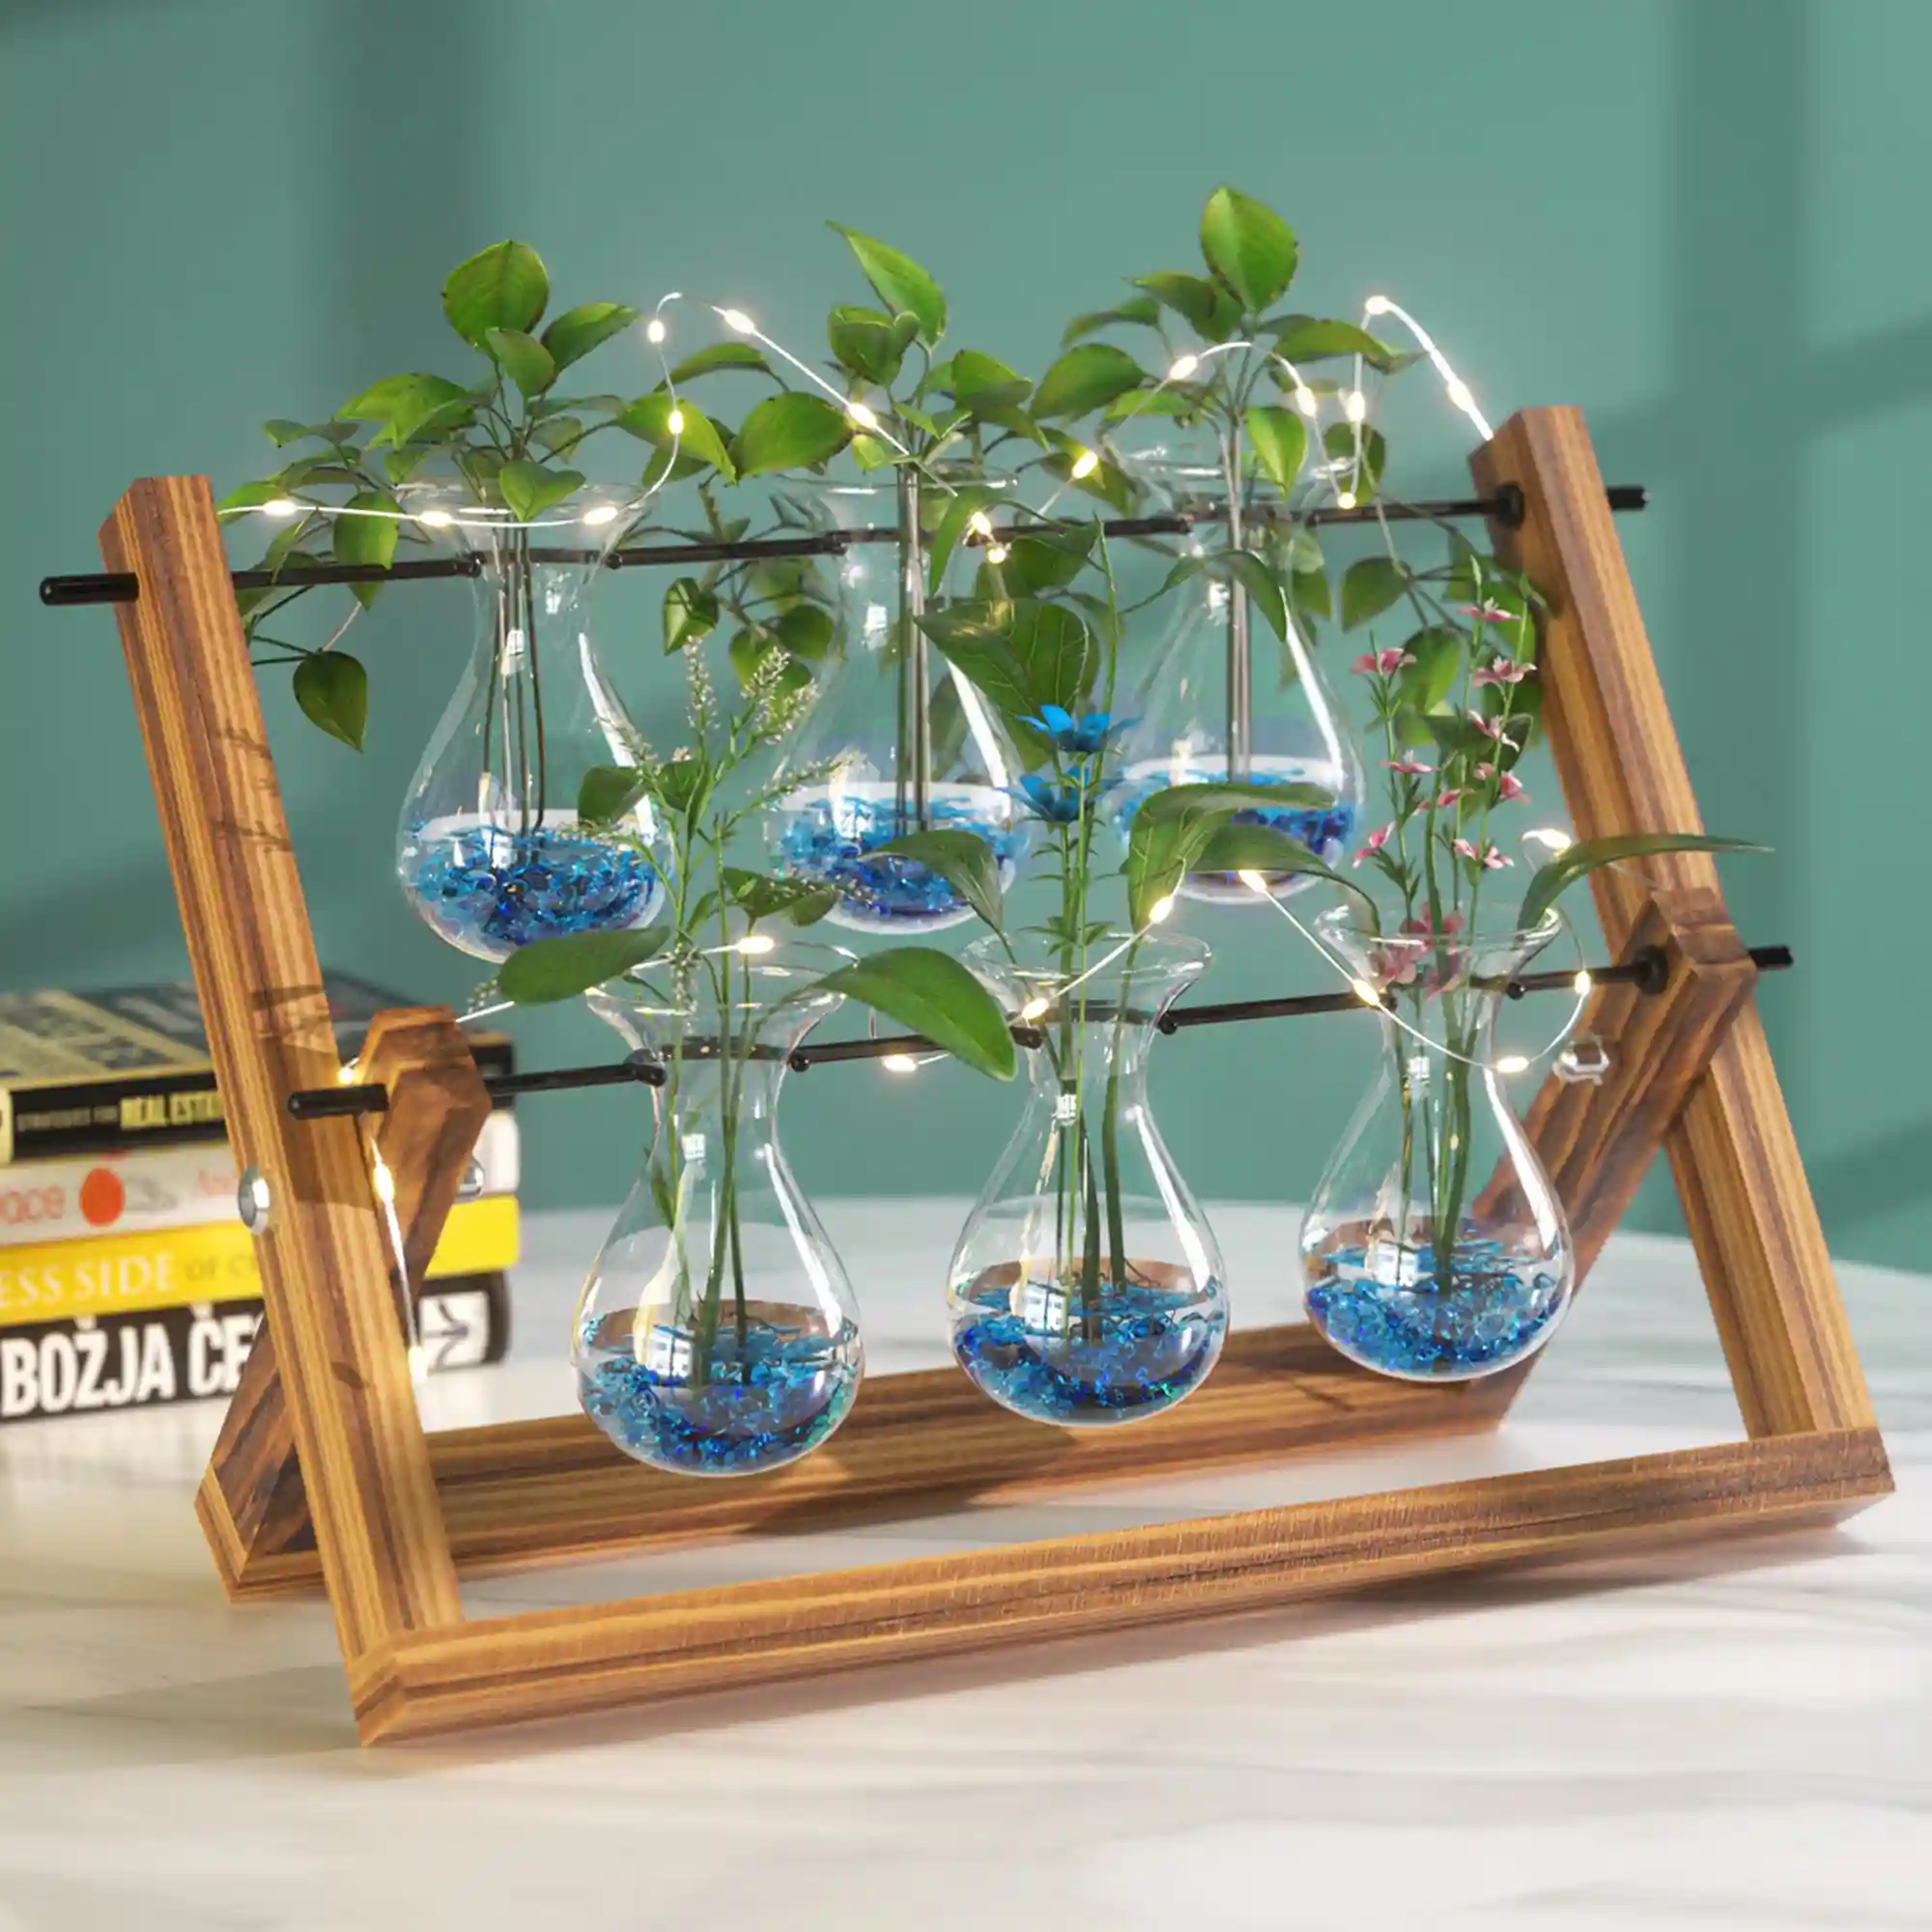 EVEAGE Propagation Stations, Plant Water Eveage Propagation Station, Propogation Planters Glass, Propagation Vase, Tabletop Plant Terrarium with Wooden Stand – New Upgraded 6 Bulb Vase